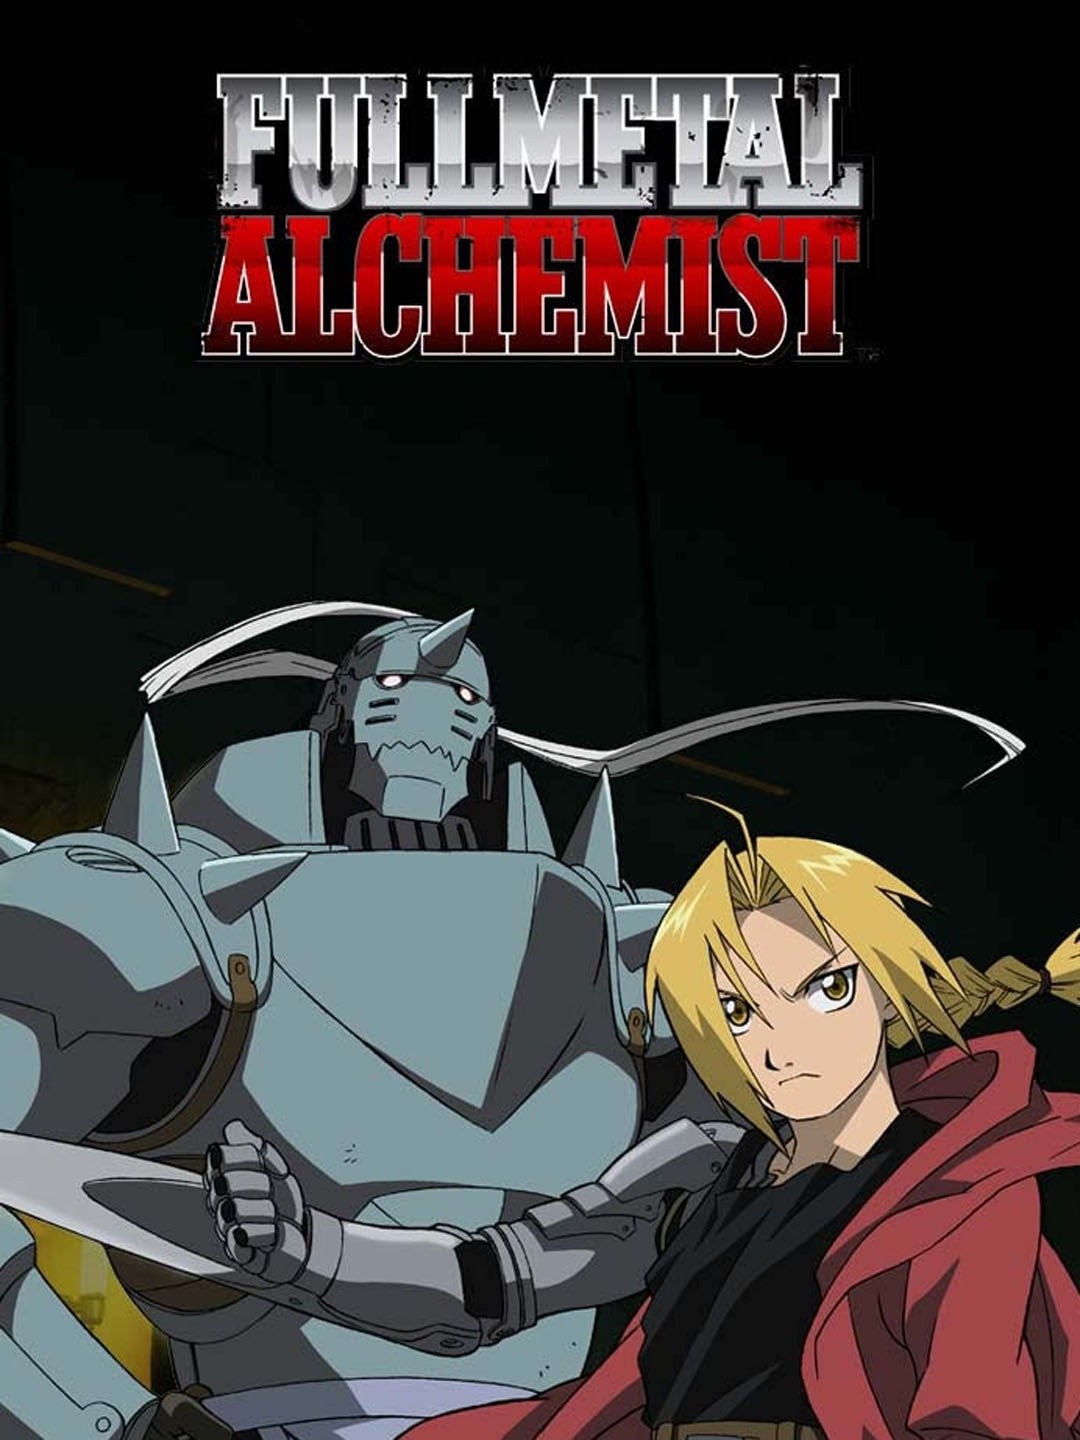 FMA Movie Review – The Film Itself